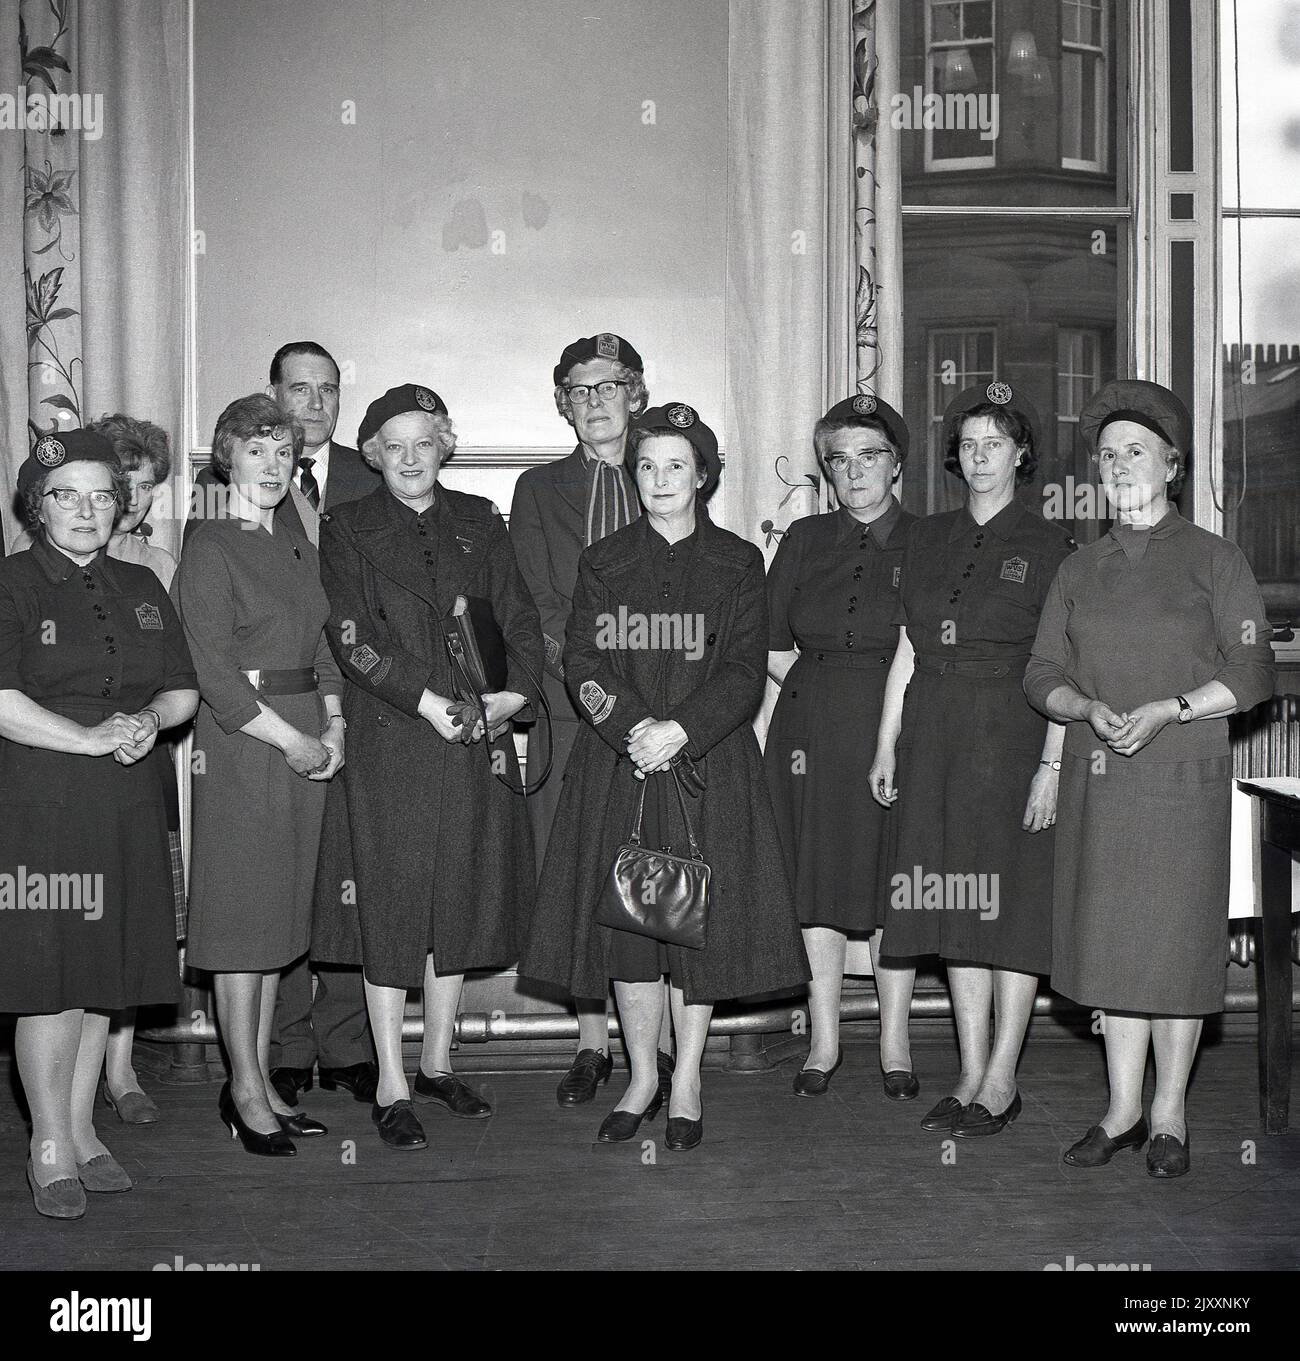 1965, historical, ladies of the WVS, the Women's Voluntary Services, gathered together in a room for a photo at Fife, Scotland, UK, several in their uniform, with emblems on their shirts, saying W.V. S Civil Defence. Now known as The Royal Voluntary Service, it was the Women's Voluntary Services (WVS) from 1938 to 1966 and then the Women's Royal Voluntary Service (WRVS) to 2004, WRVS to 2013. It was founded in 1938, as a British women's organisation to recruit women into the Air Raid Precautions (ARP). The RVS is a voluntary organisation concerned with helping people in need throughout the UK. Stock Photo